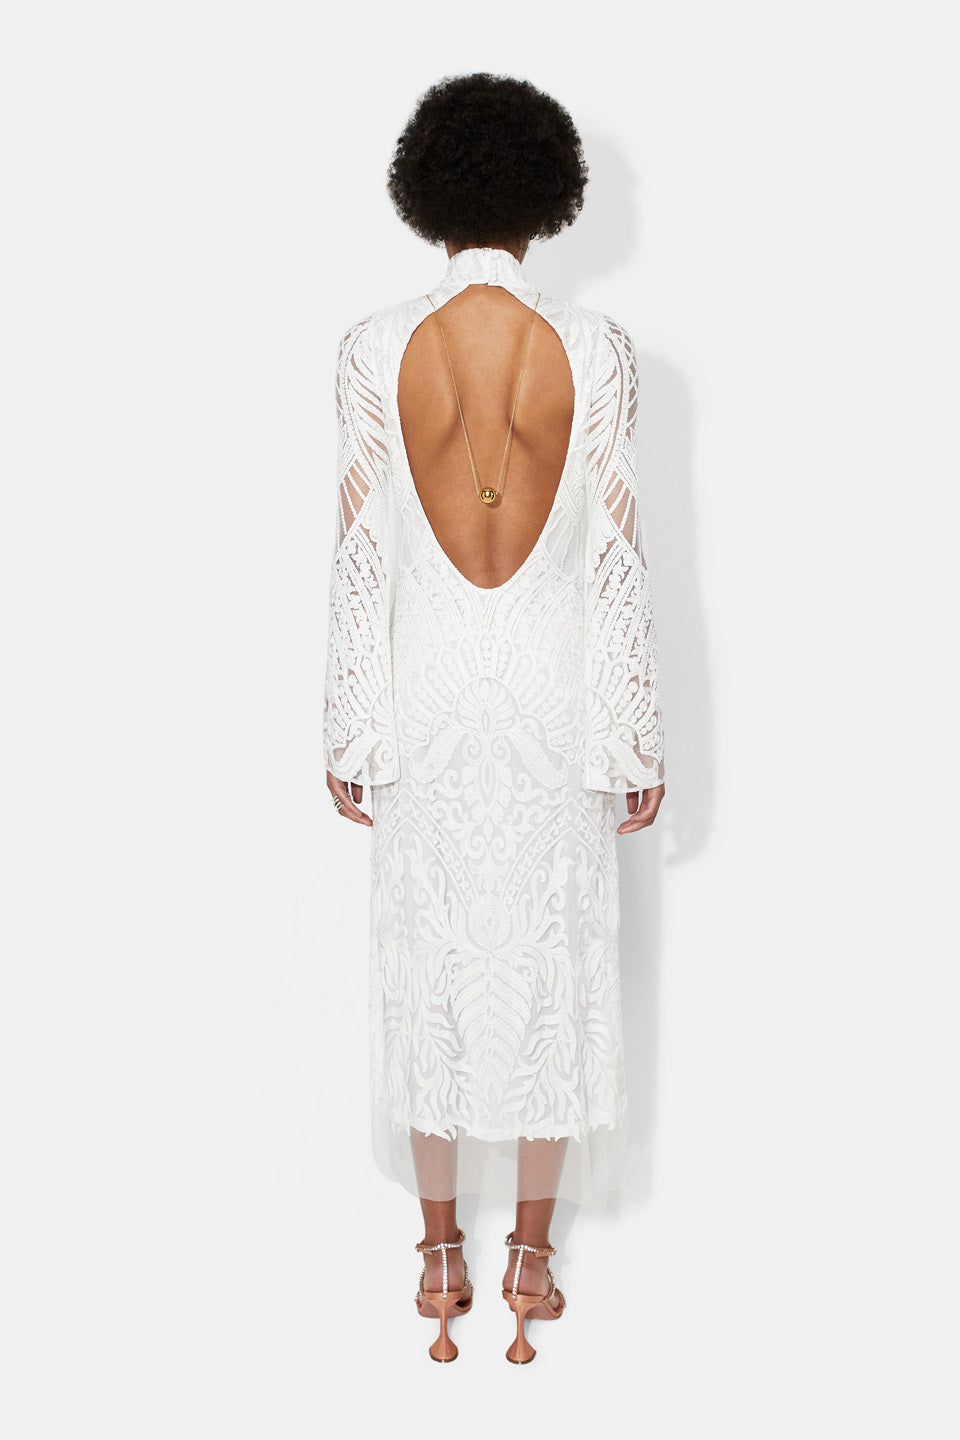 Borghese Bridal Backless Dress in Off-White